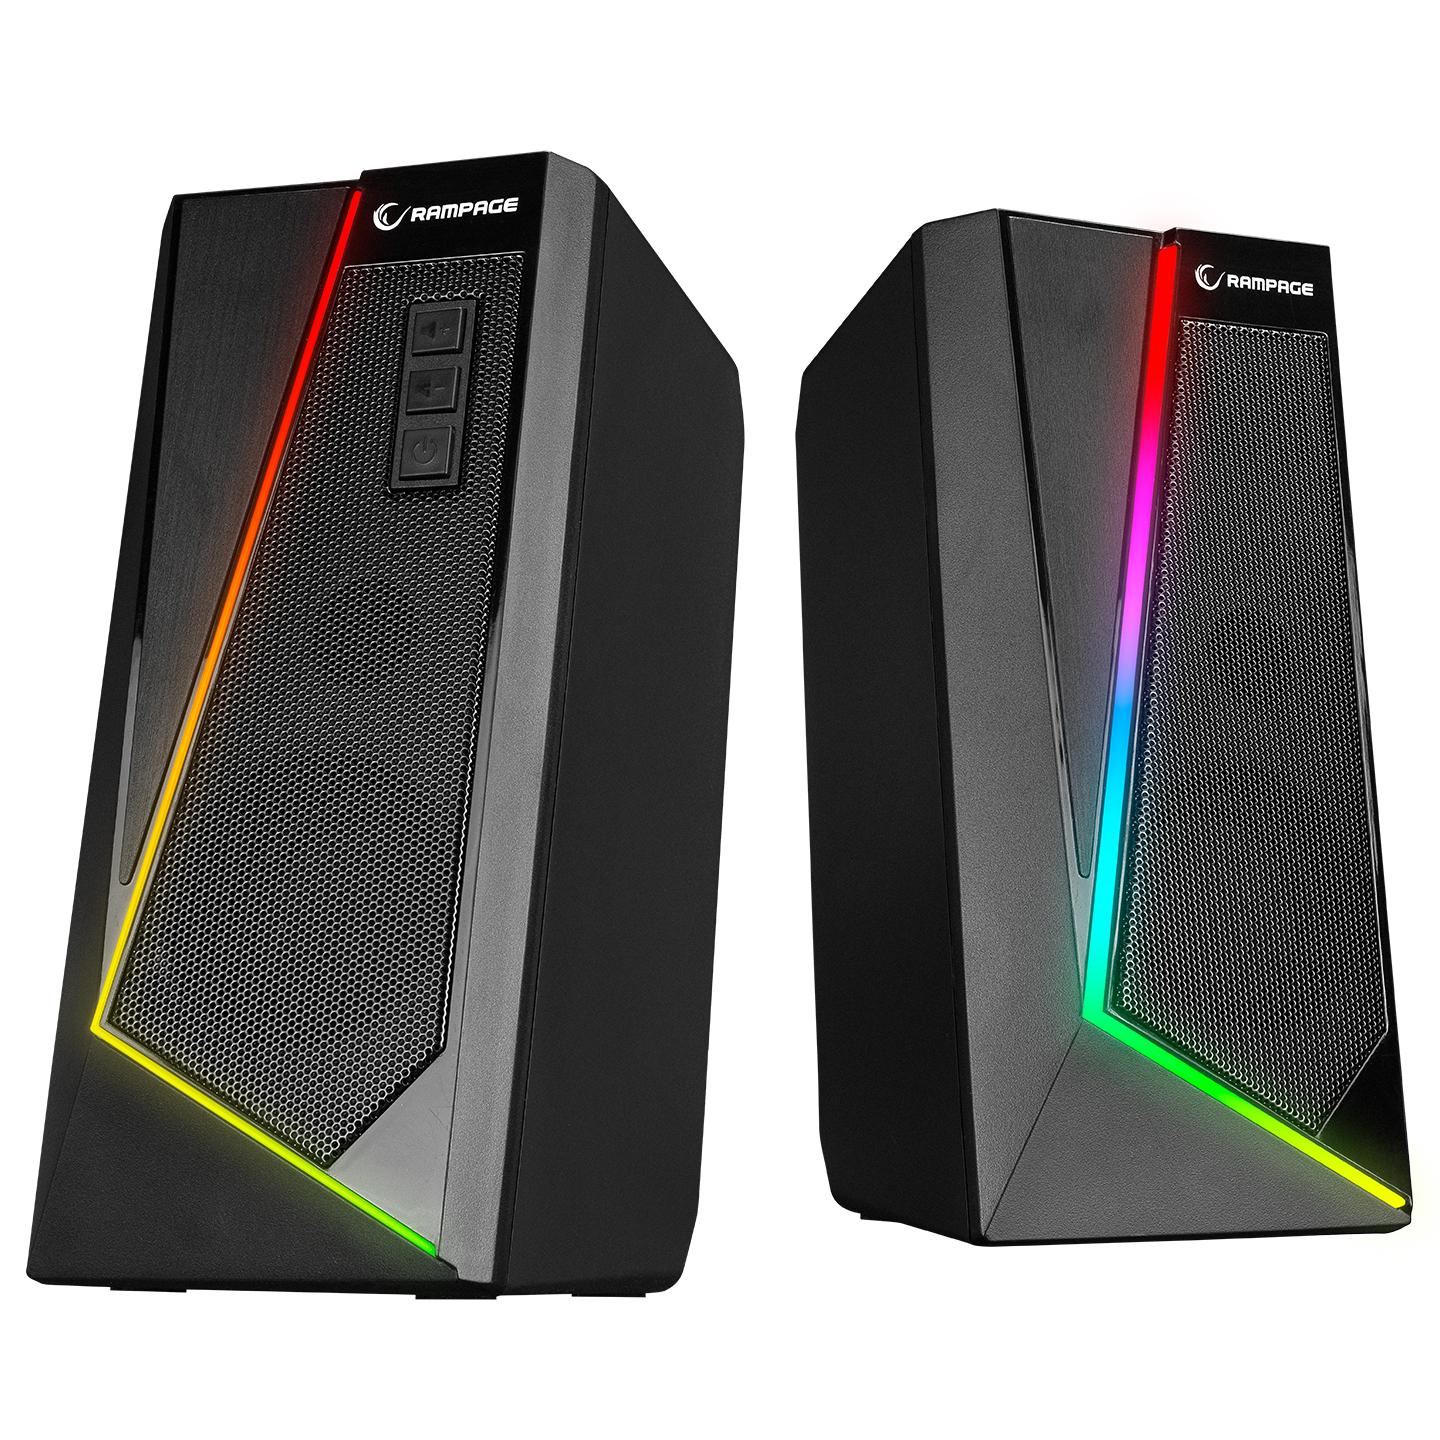 Selected image for Rampage RMS-X8 MAJESTY Zvučnici, Bluetooth & FM RGB 2.0 crni